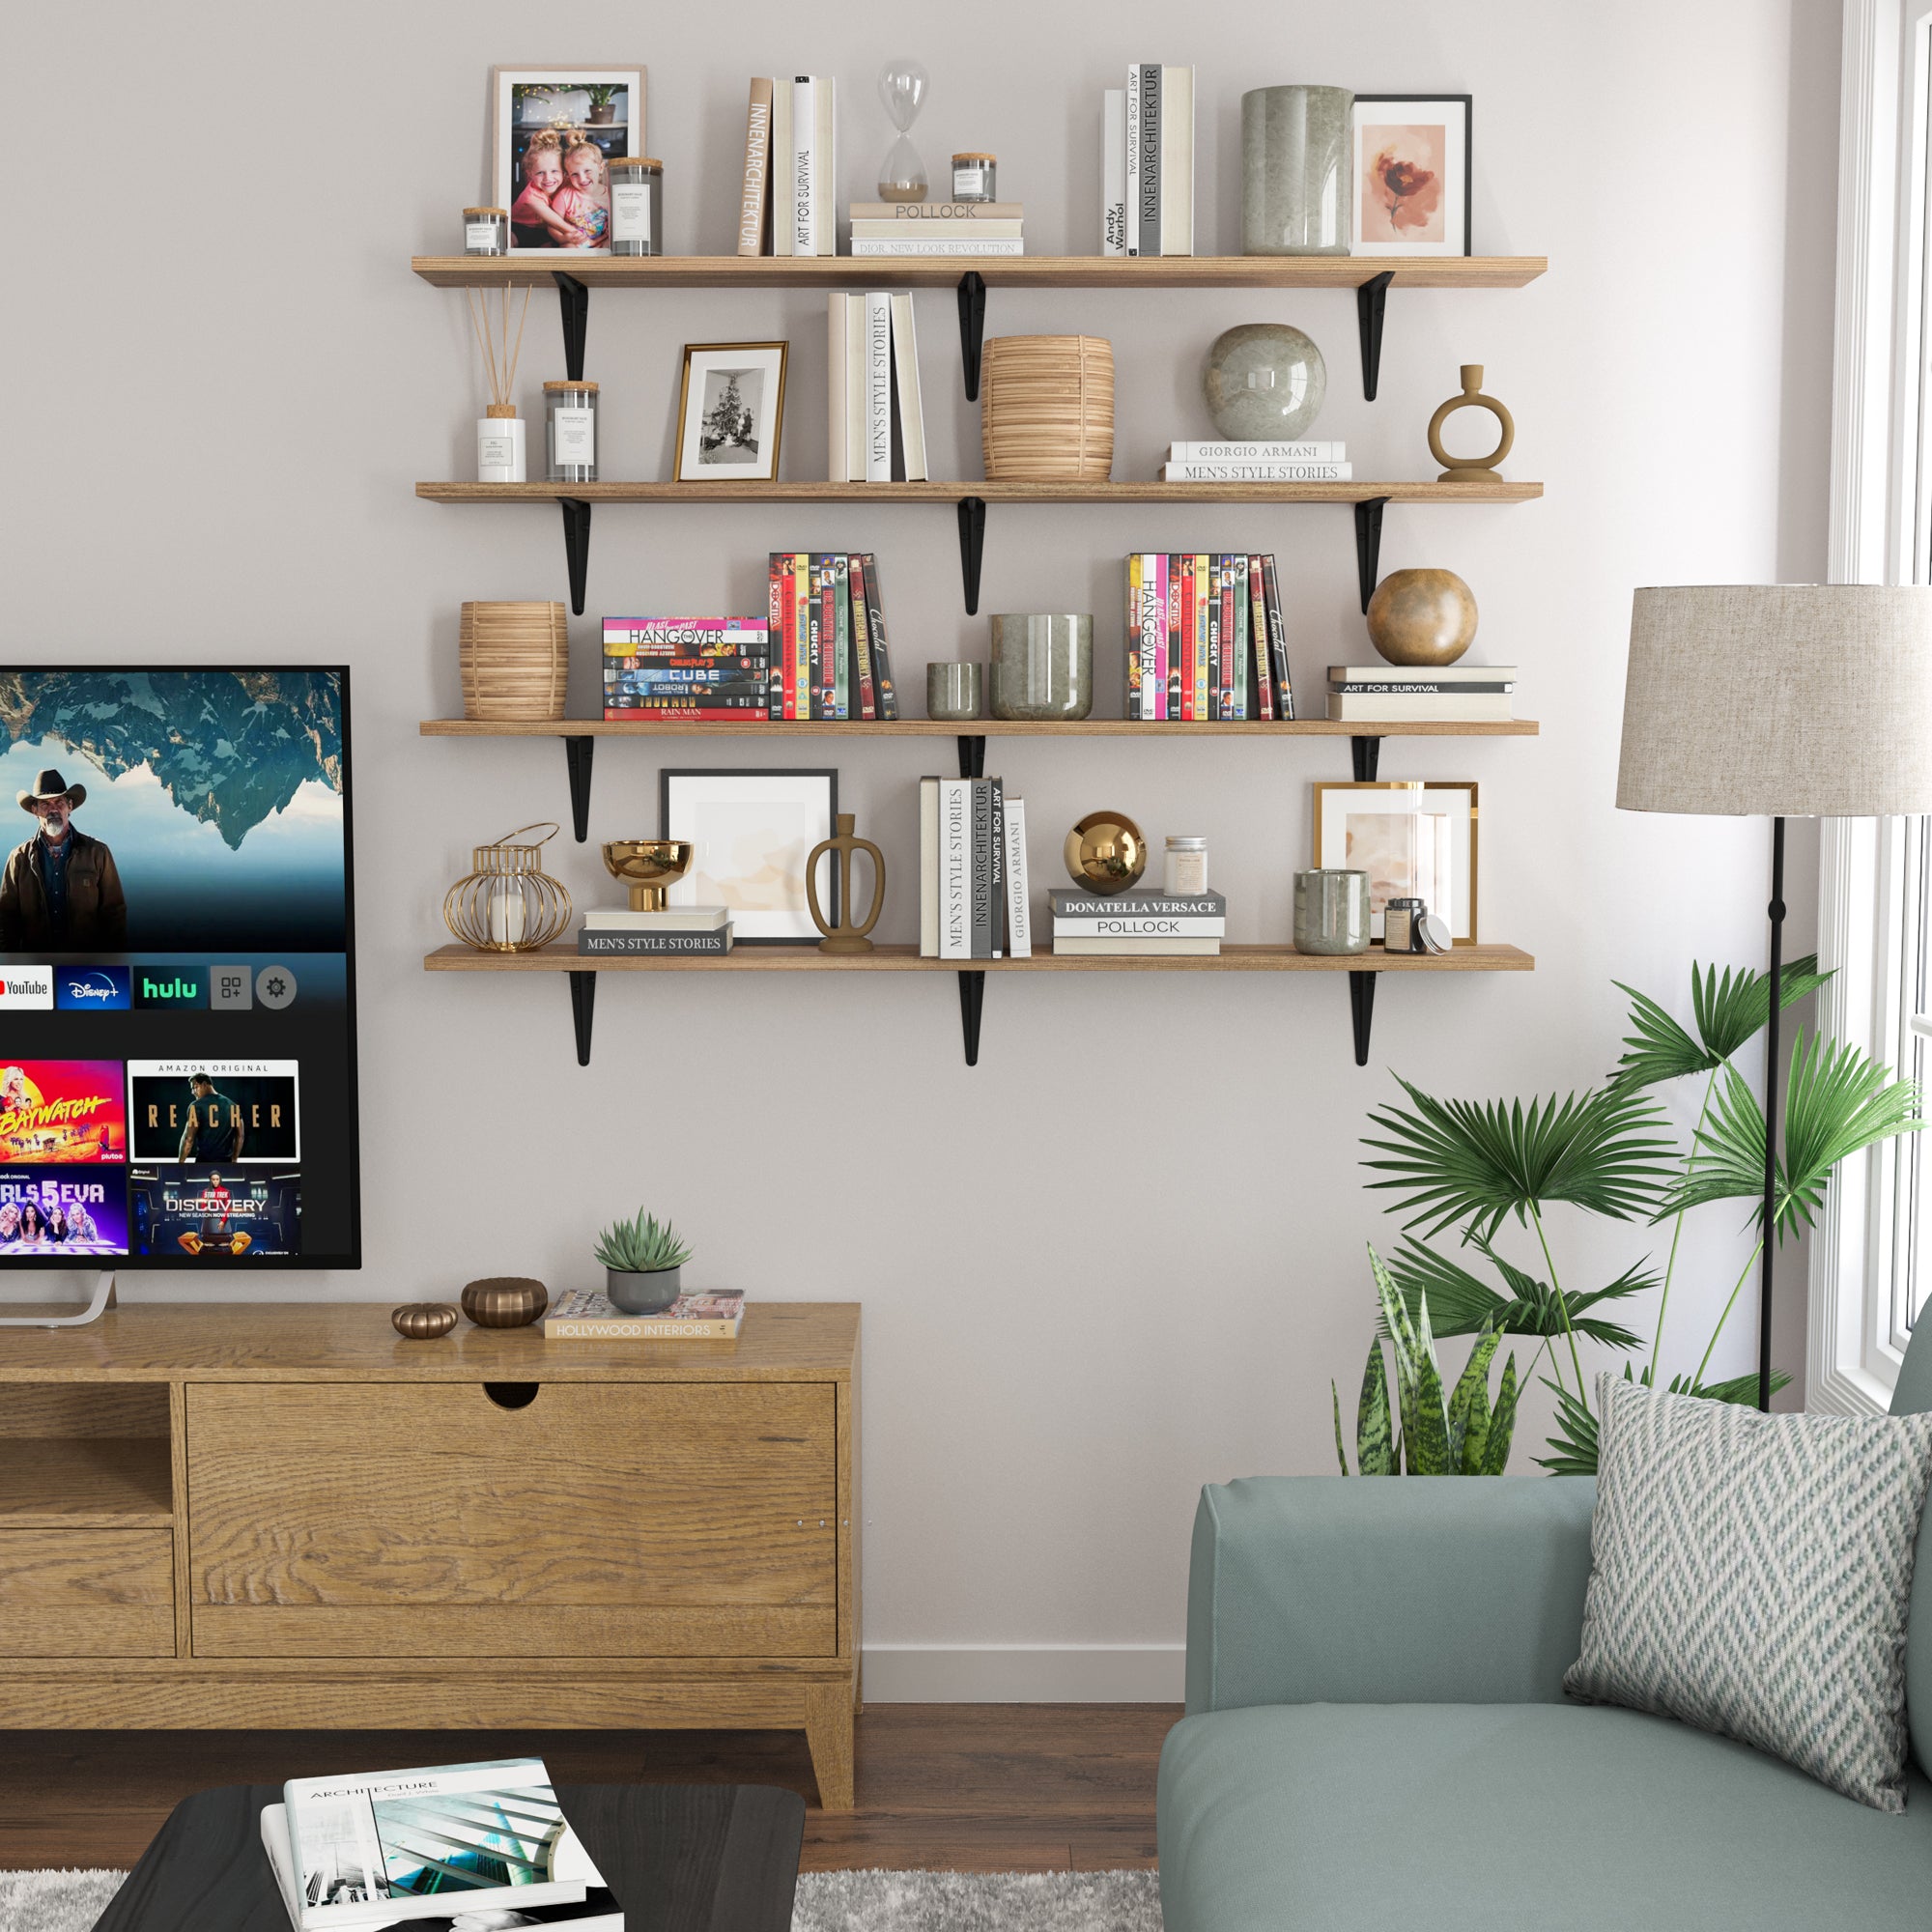 A stylish living room setup with wood floating shelves above a TV displaying trinkets, books, and decorative items, complemented by a modern sofa, side table, and an elegant floor lamp.